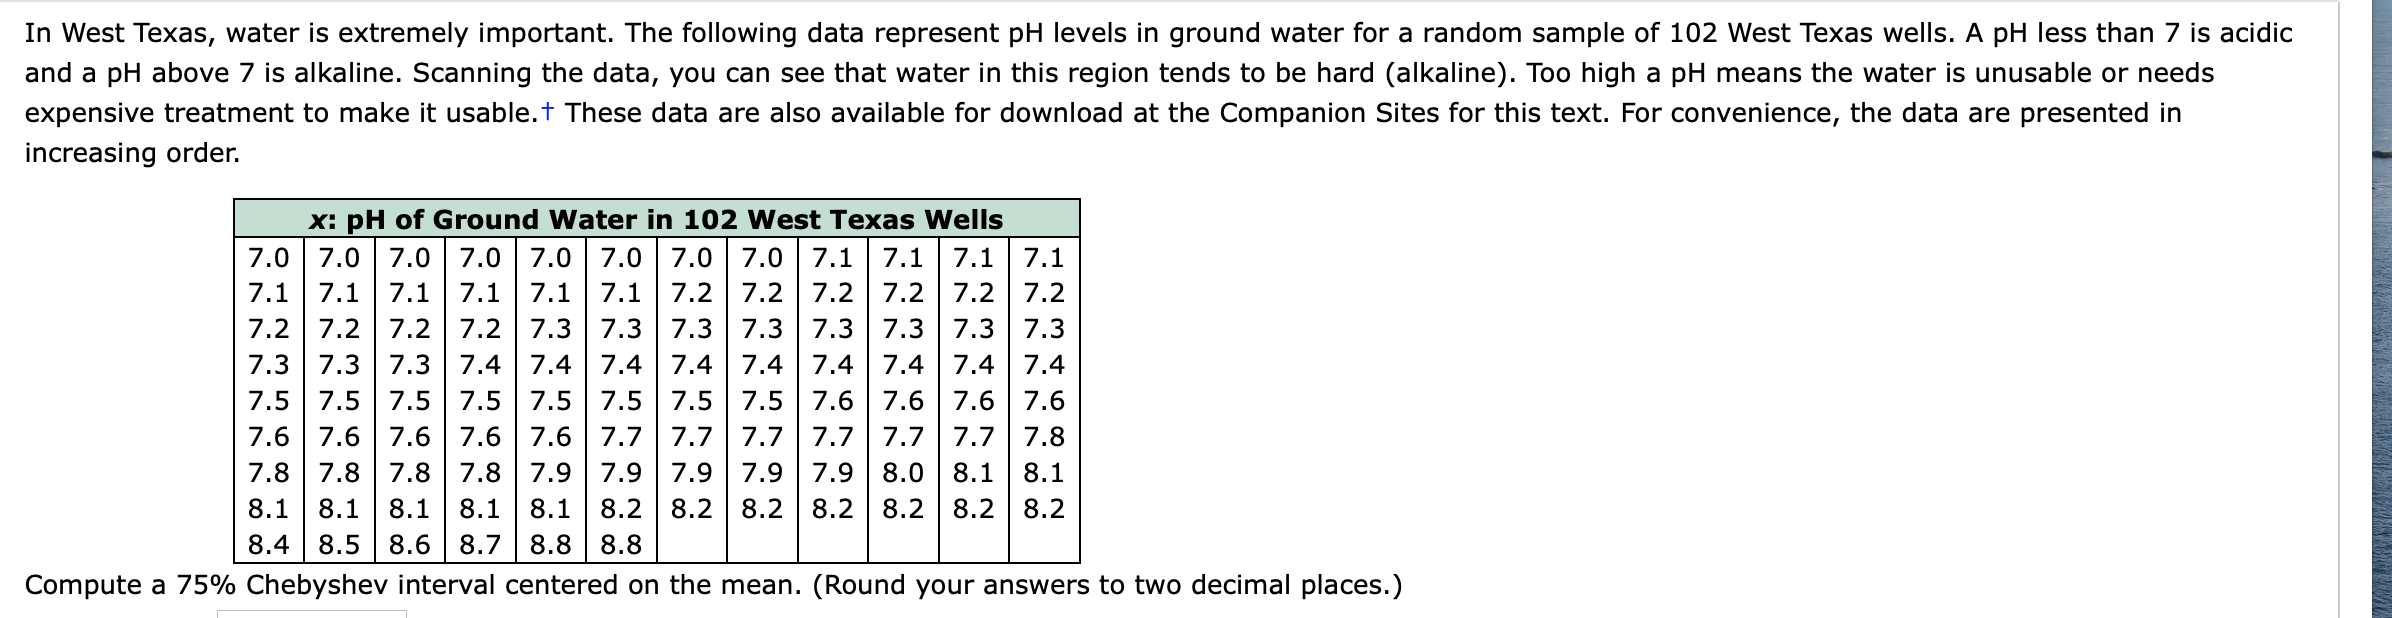 In West Texas, water is extremely important. The following data represent pH levels in ground water for a random sample of 102 West Texas wells. A pH less than 7 is acidic
and a pH above 7 is alkaline. Scanning the data, you can see that water in this region tends to be hard (alkaline). Too high a pH means the water is unusable or needs
expensive treatment to make it usable.t These data are also available for download at the Companion Sites for this text. For convenience, the data are presented in
increasing order.
x: pH of Ground Water in 102 West Texas Wells
7.1 7.1 7.1 7.1 7.1 7.1 7.2 7.2 7.2 7.2 7.2 7.2
7.2 7.2 7.2 7.2 7.3 7.3 7.3 7.3 7.3 7.3 7.3 7.3
7.3 7.3 7.3 7.4 7.4 7.4 | 7.4 7.4 7.4 7.4 7.4 7.4
7.5 7.5 7.5 7.5 7.5 7.5 7.5 7.5 7.6 7.6 7.6 7.6
7.6 7.6 7.6 7.6 7.6 7.7 |7.7 | 7.7 7.7 7.7 7.7 7.8
7.8 7.8 7.8 7.8 7.9 | 7.9 7.9 | 7.9 | 7.9 8.0 8.1 8.1
8.1 8.1 8.1
8.4 8.5 8.6 8.7 8.8 8.8
8.1
8.1 8.2 8.2 8.2 8.2 8.2 8.2 8.2
Compute a 75% Chebyshev interval centered on the mean. (Round your answers to two decimal places.)
